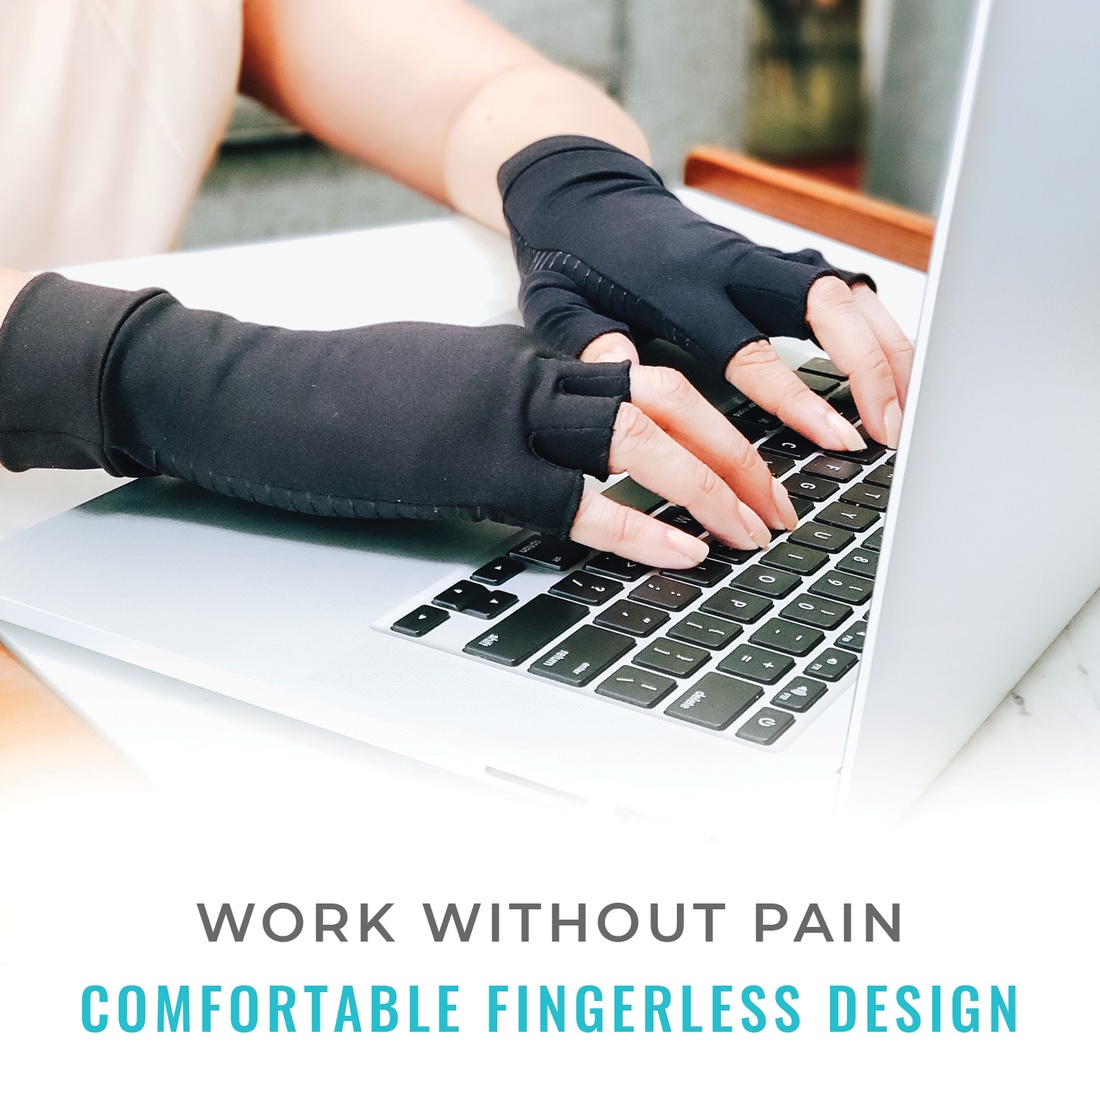 Work without Pain - Comfortable Fingerless Design